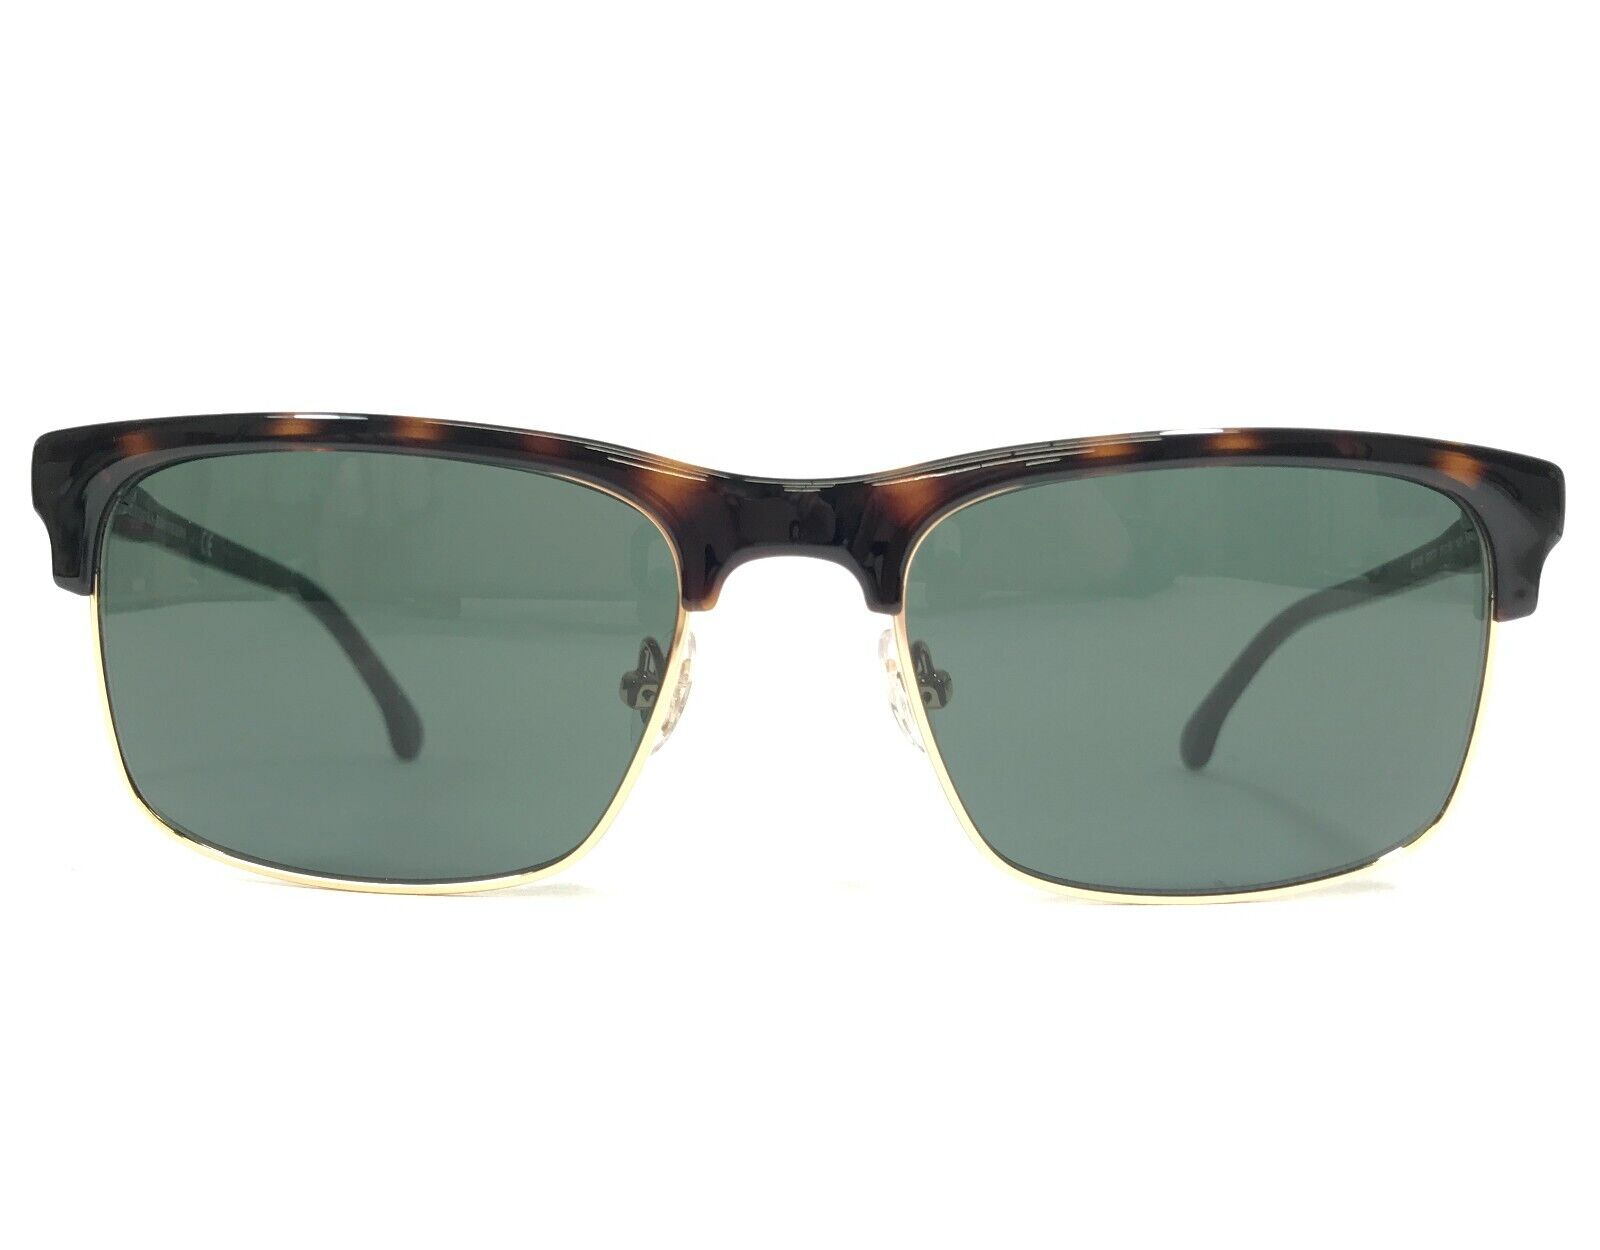 Primary image for Brooks Brothers Sunglasses BB4026 600171 Gold Brown Tortoise with Green Lenses